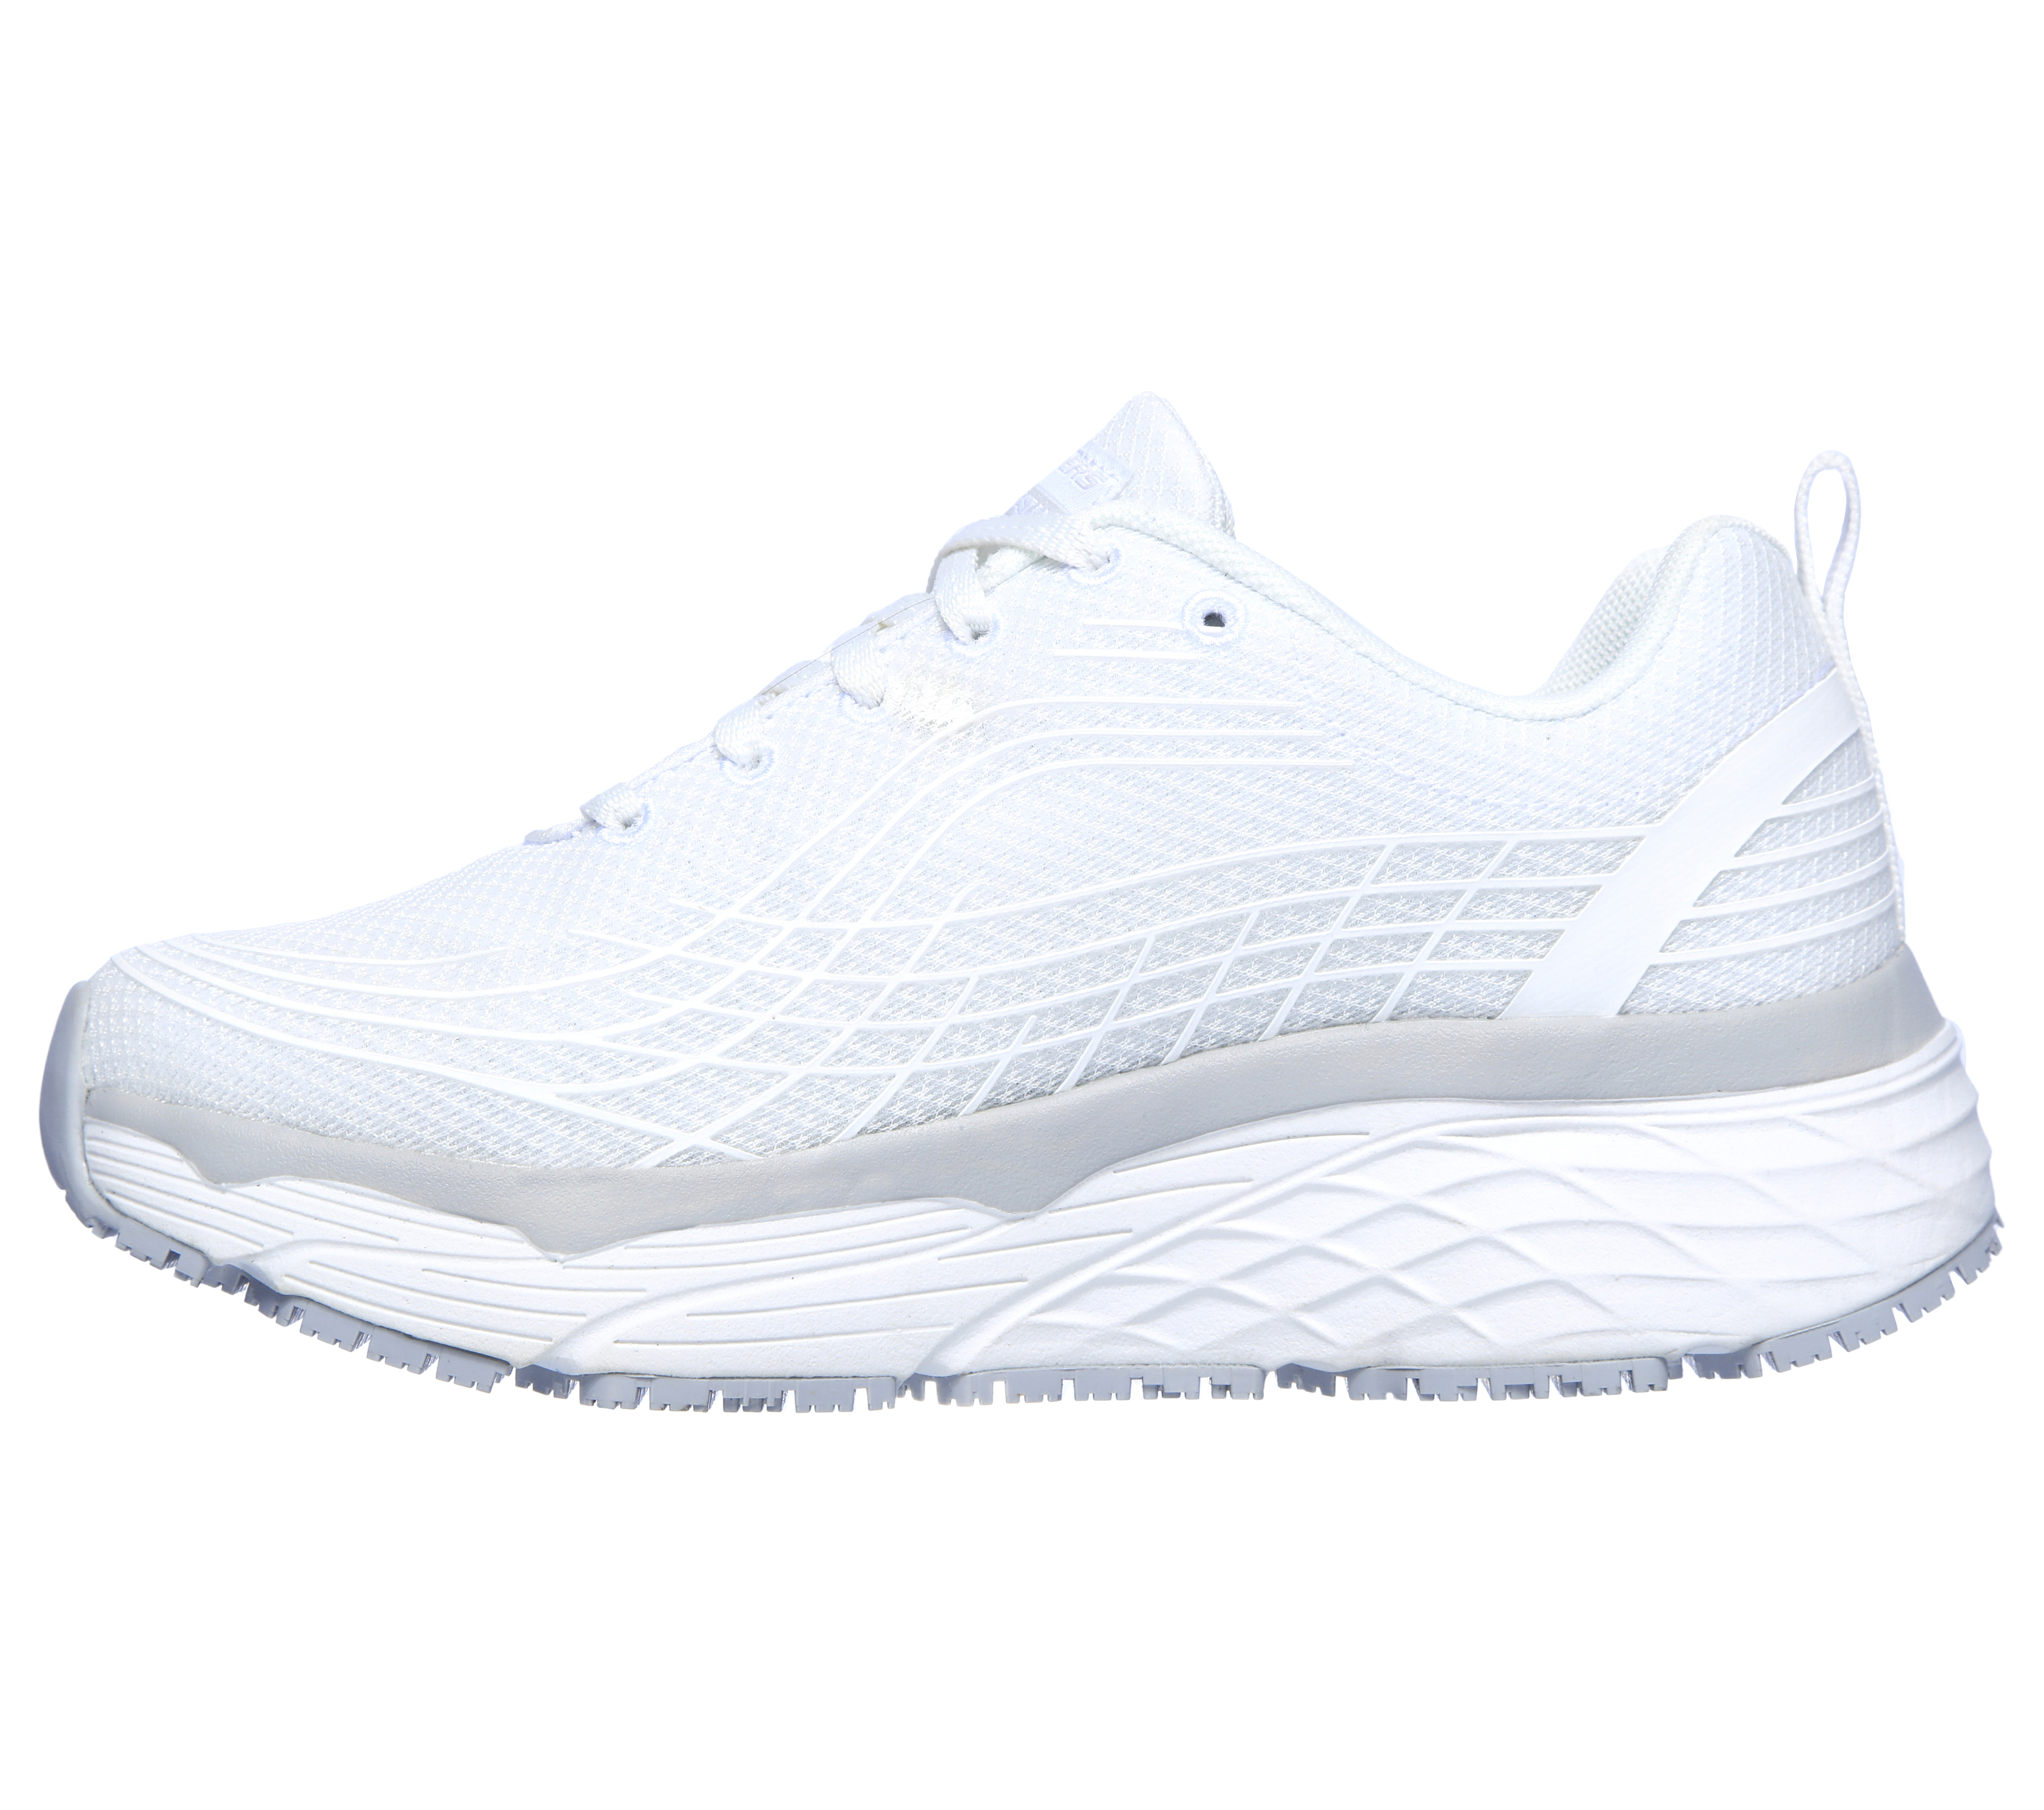 Cushioning SR Max Fit: | SKECHERS Work Elite Relaxed